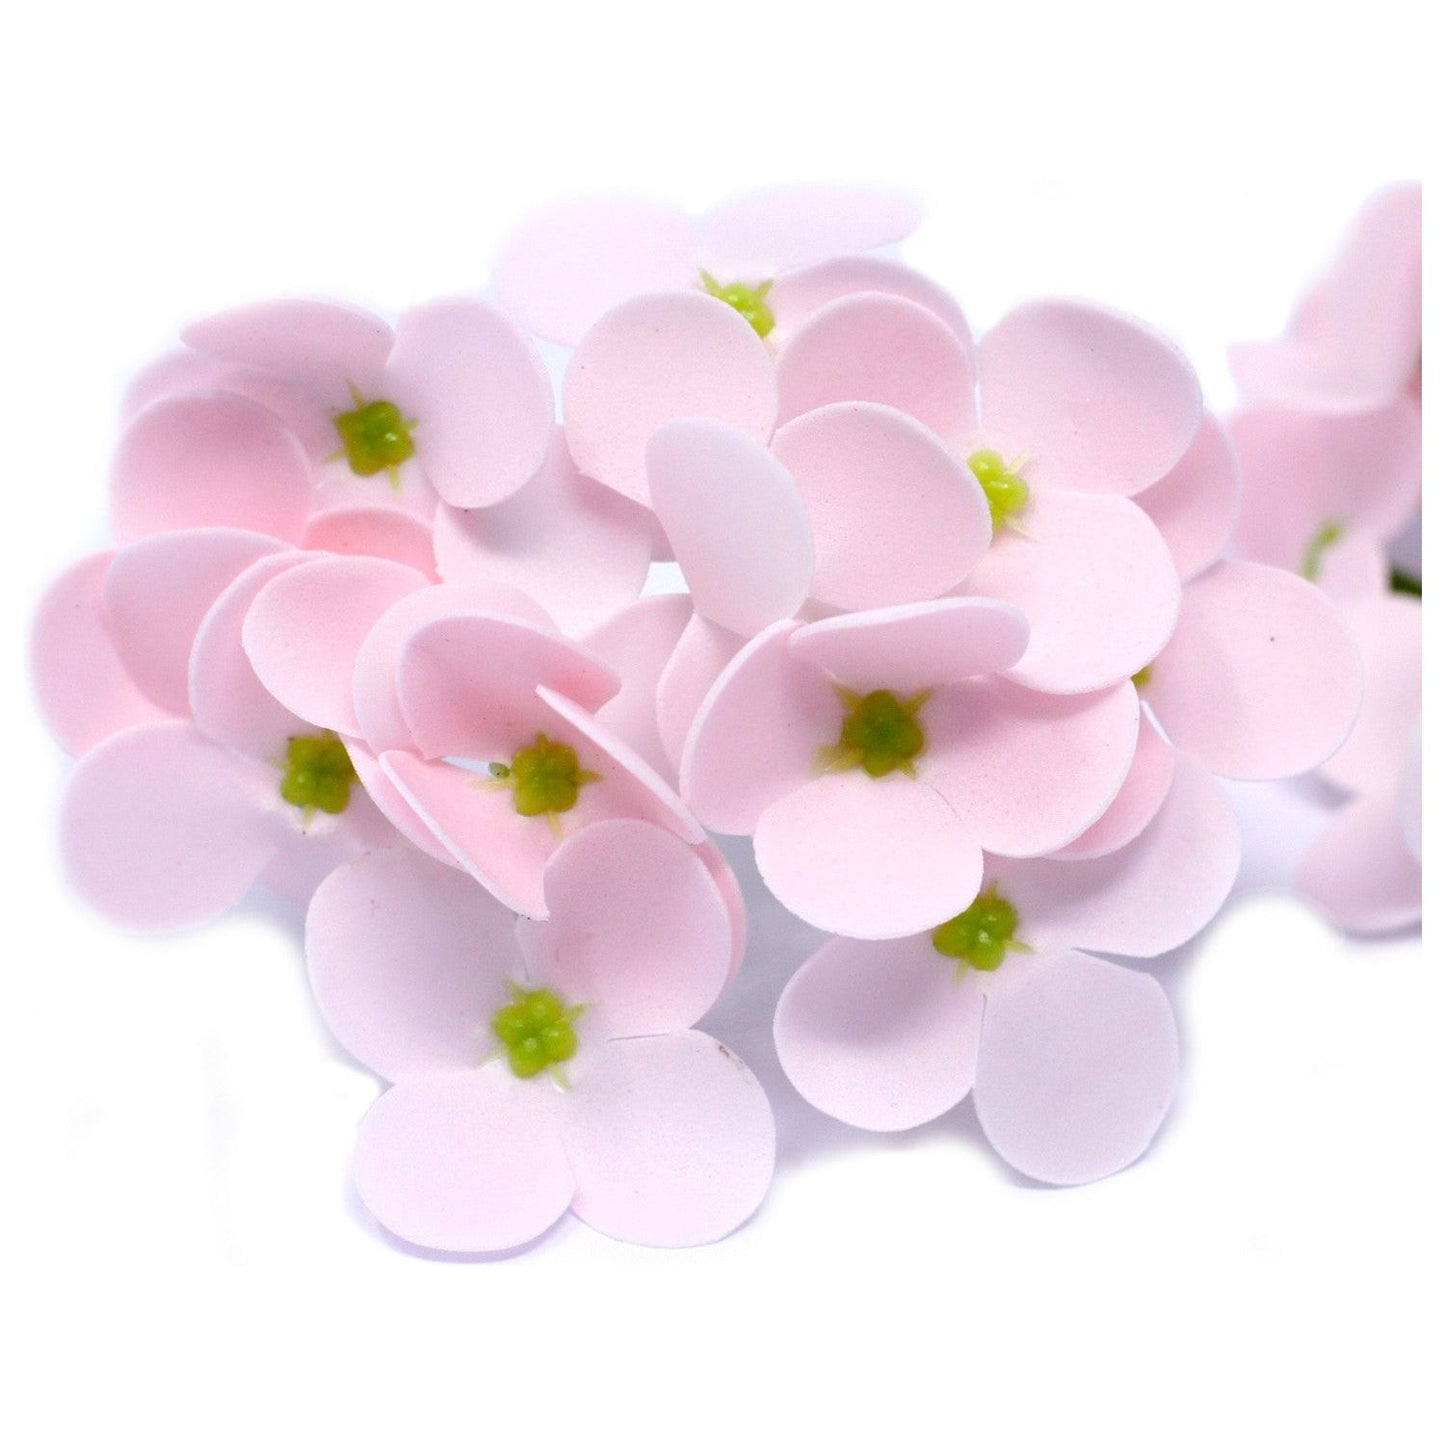 Craft Soap Flowers - Hyacinth Bean - Pink x 10 - Ashton and Finch